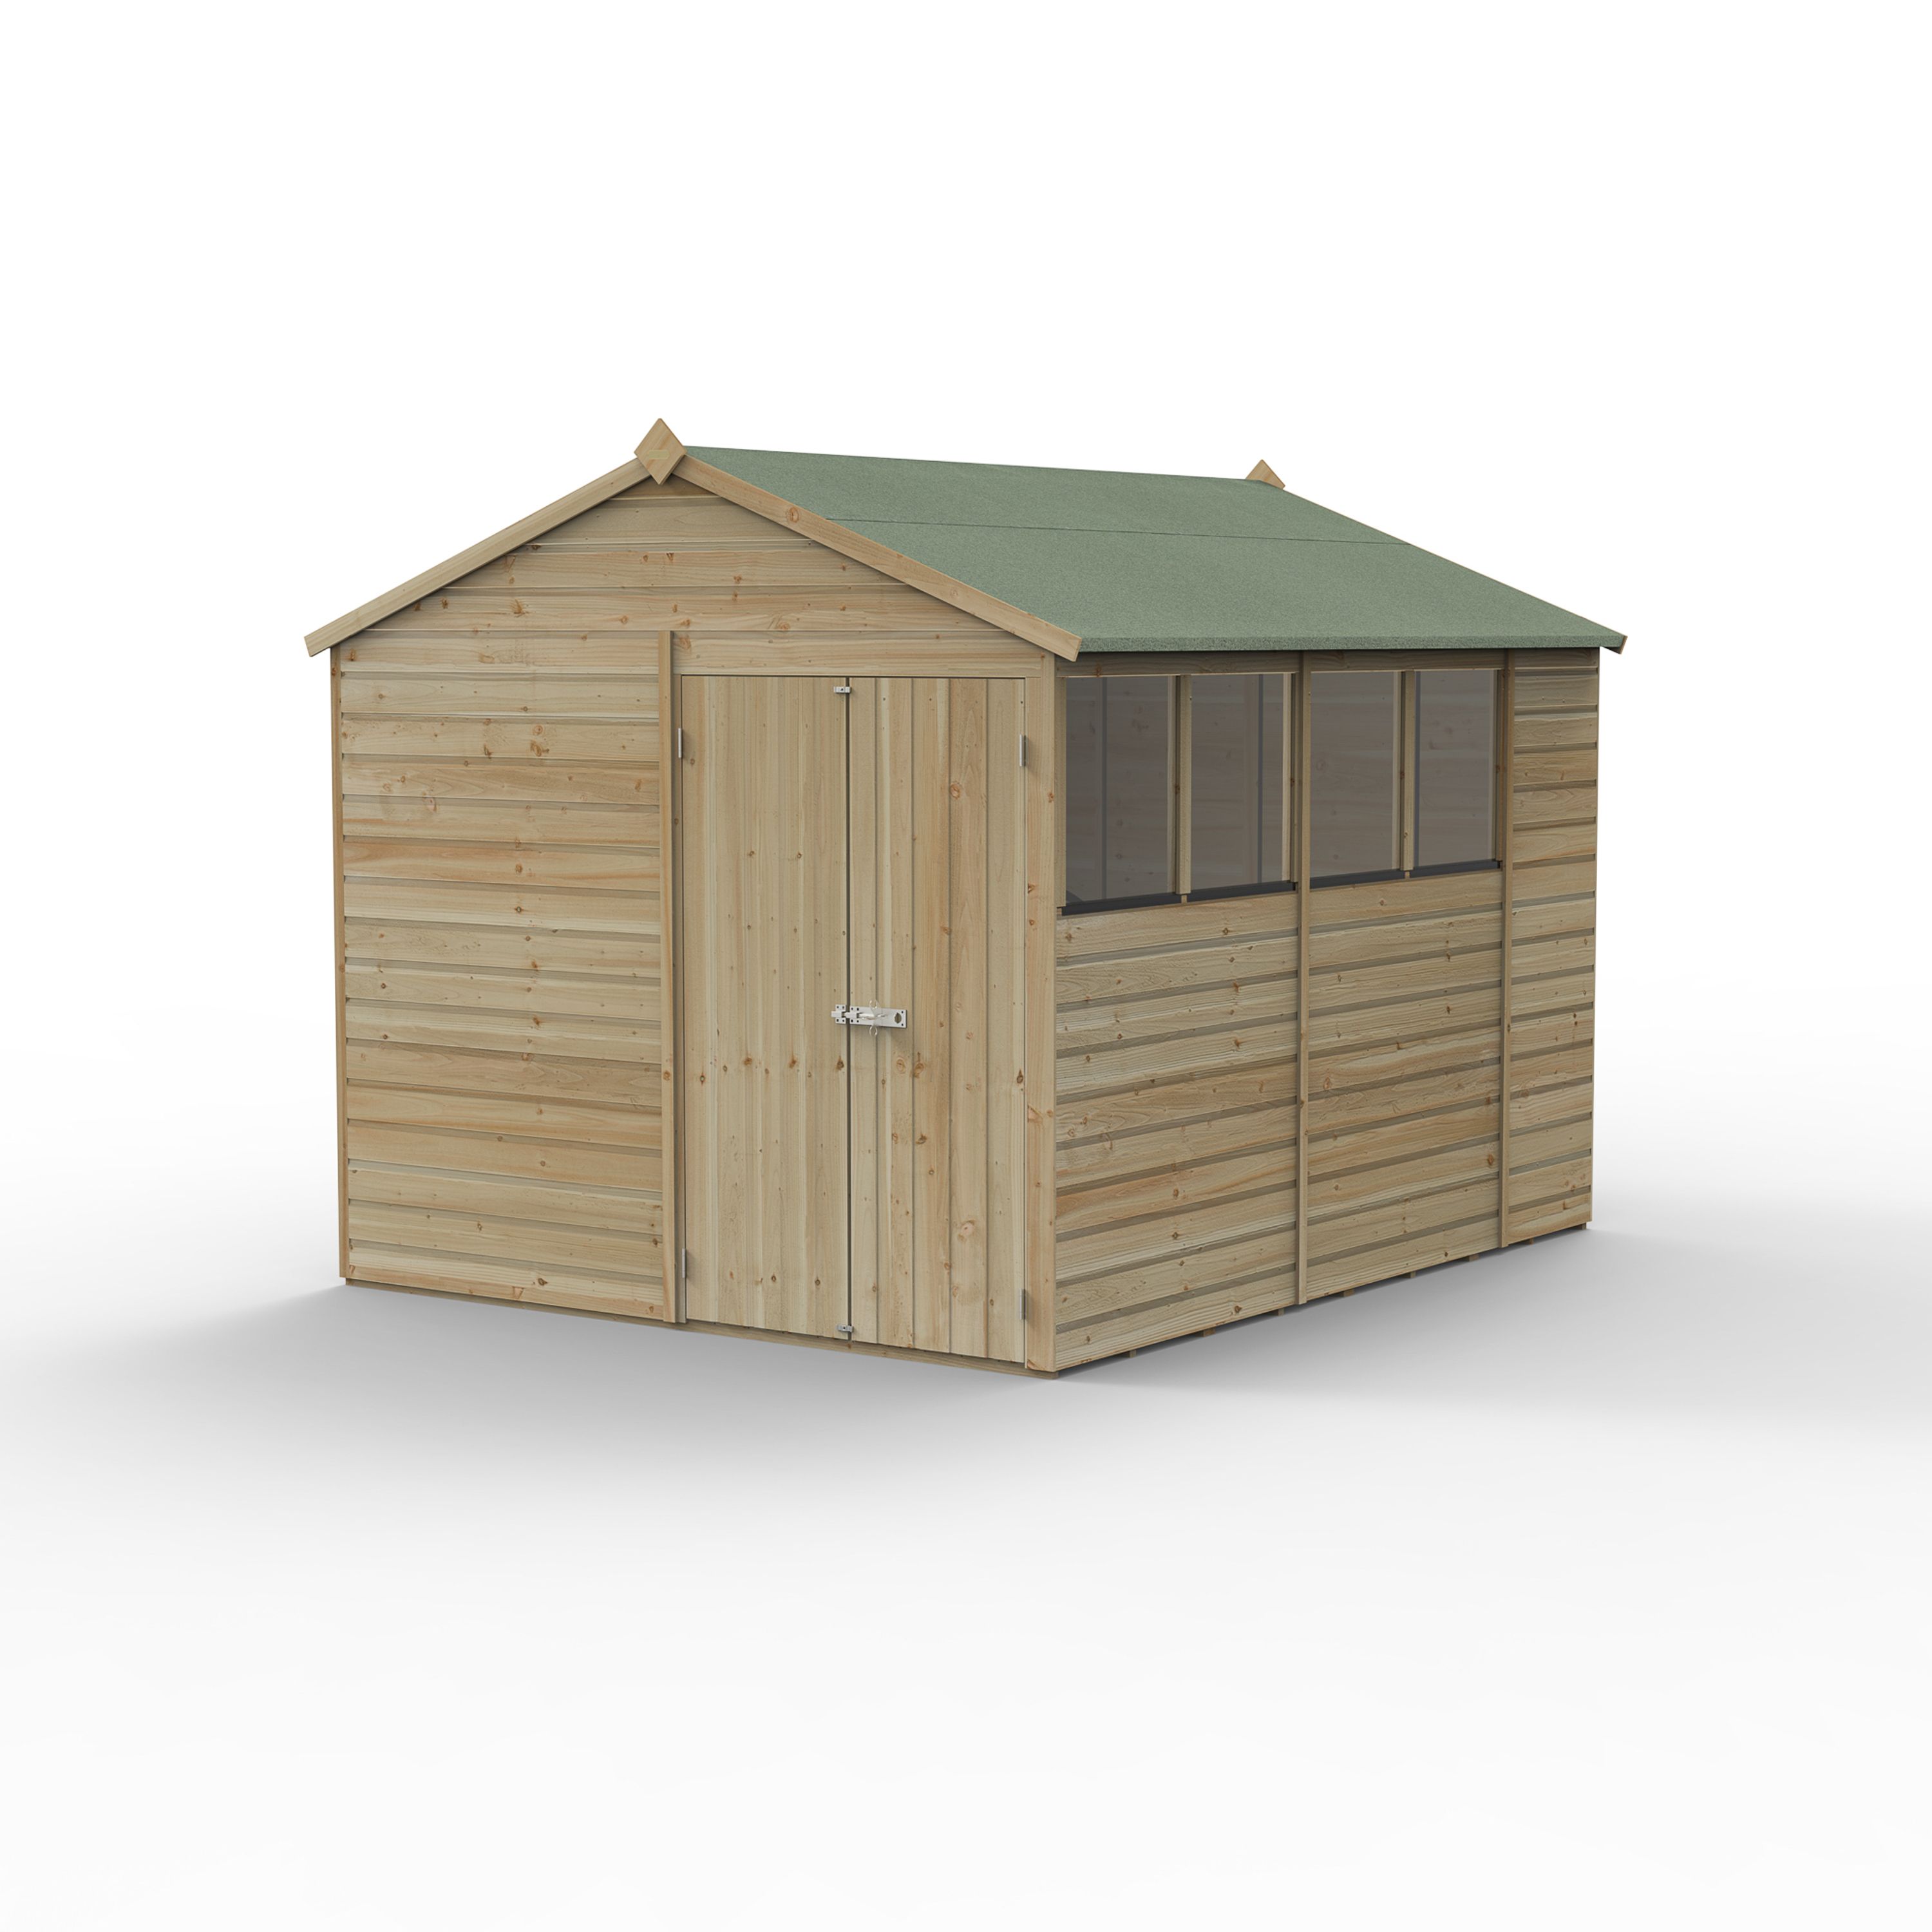 Forest Garden Beckwood 10x8 ft Apex Natural timber Wooden 2 door Shed with floor & 4 windows (Base included)